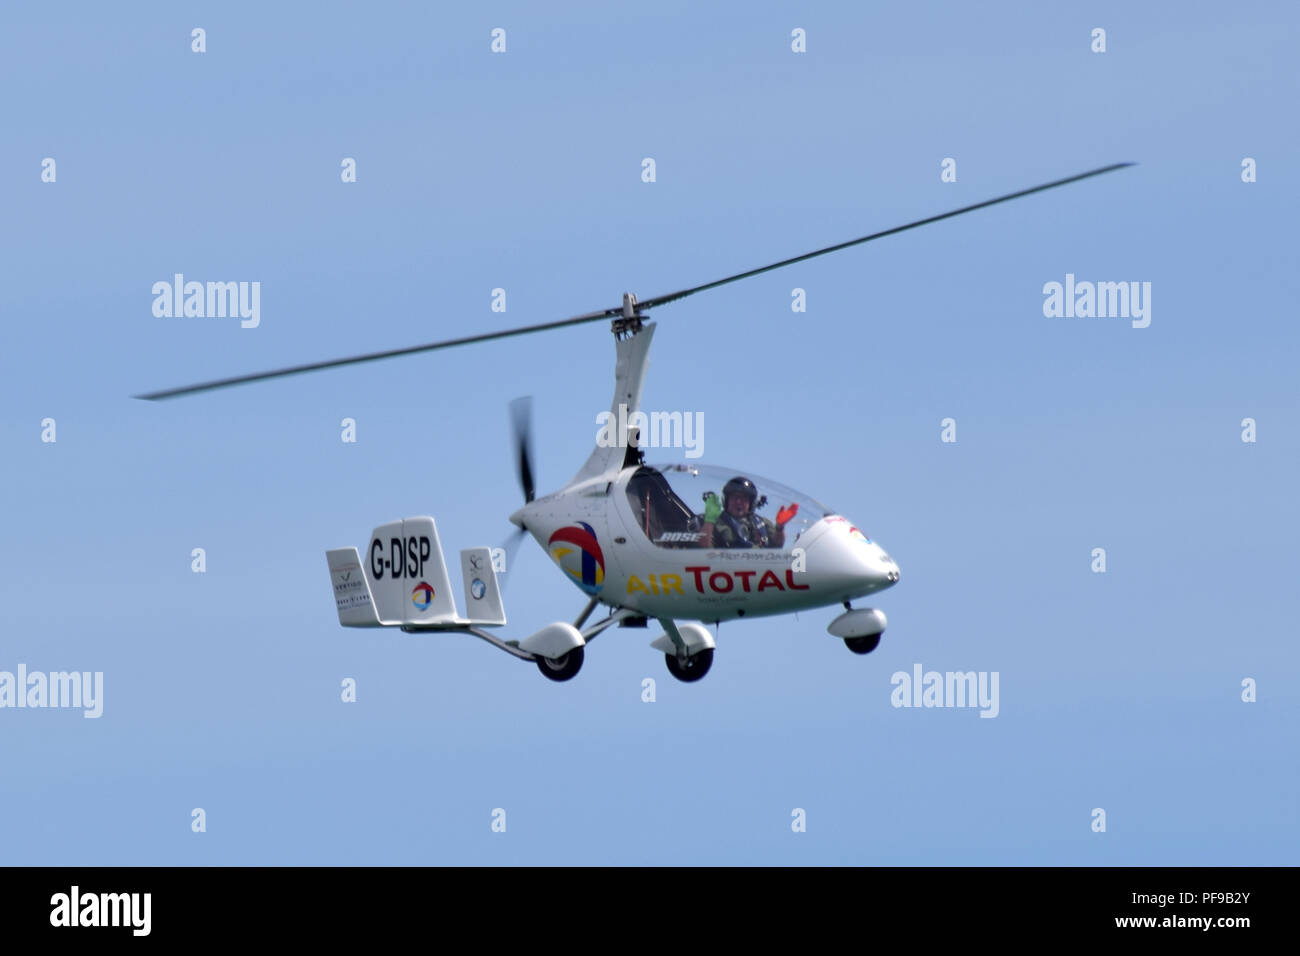 Eastbourne Airshow 2018 Gyro Copter Foto Stock